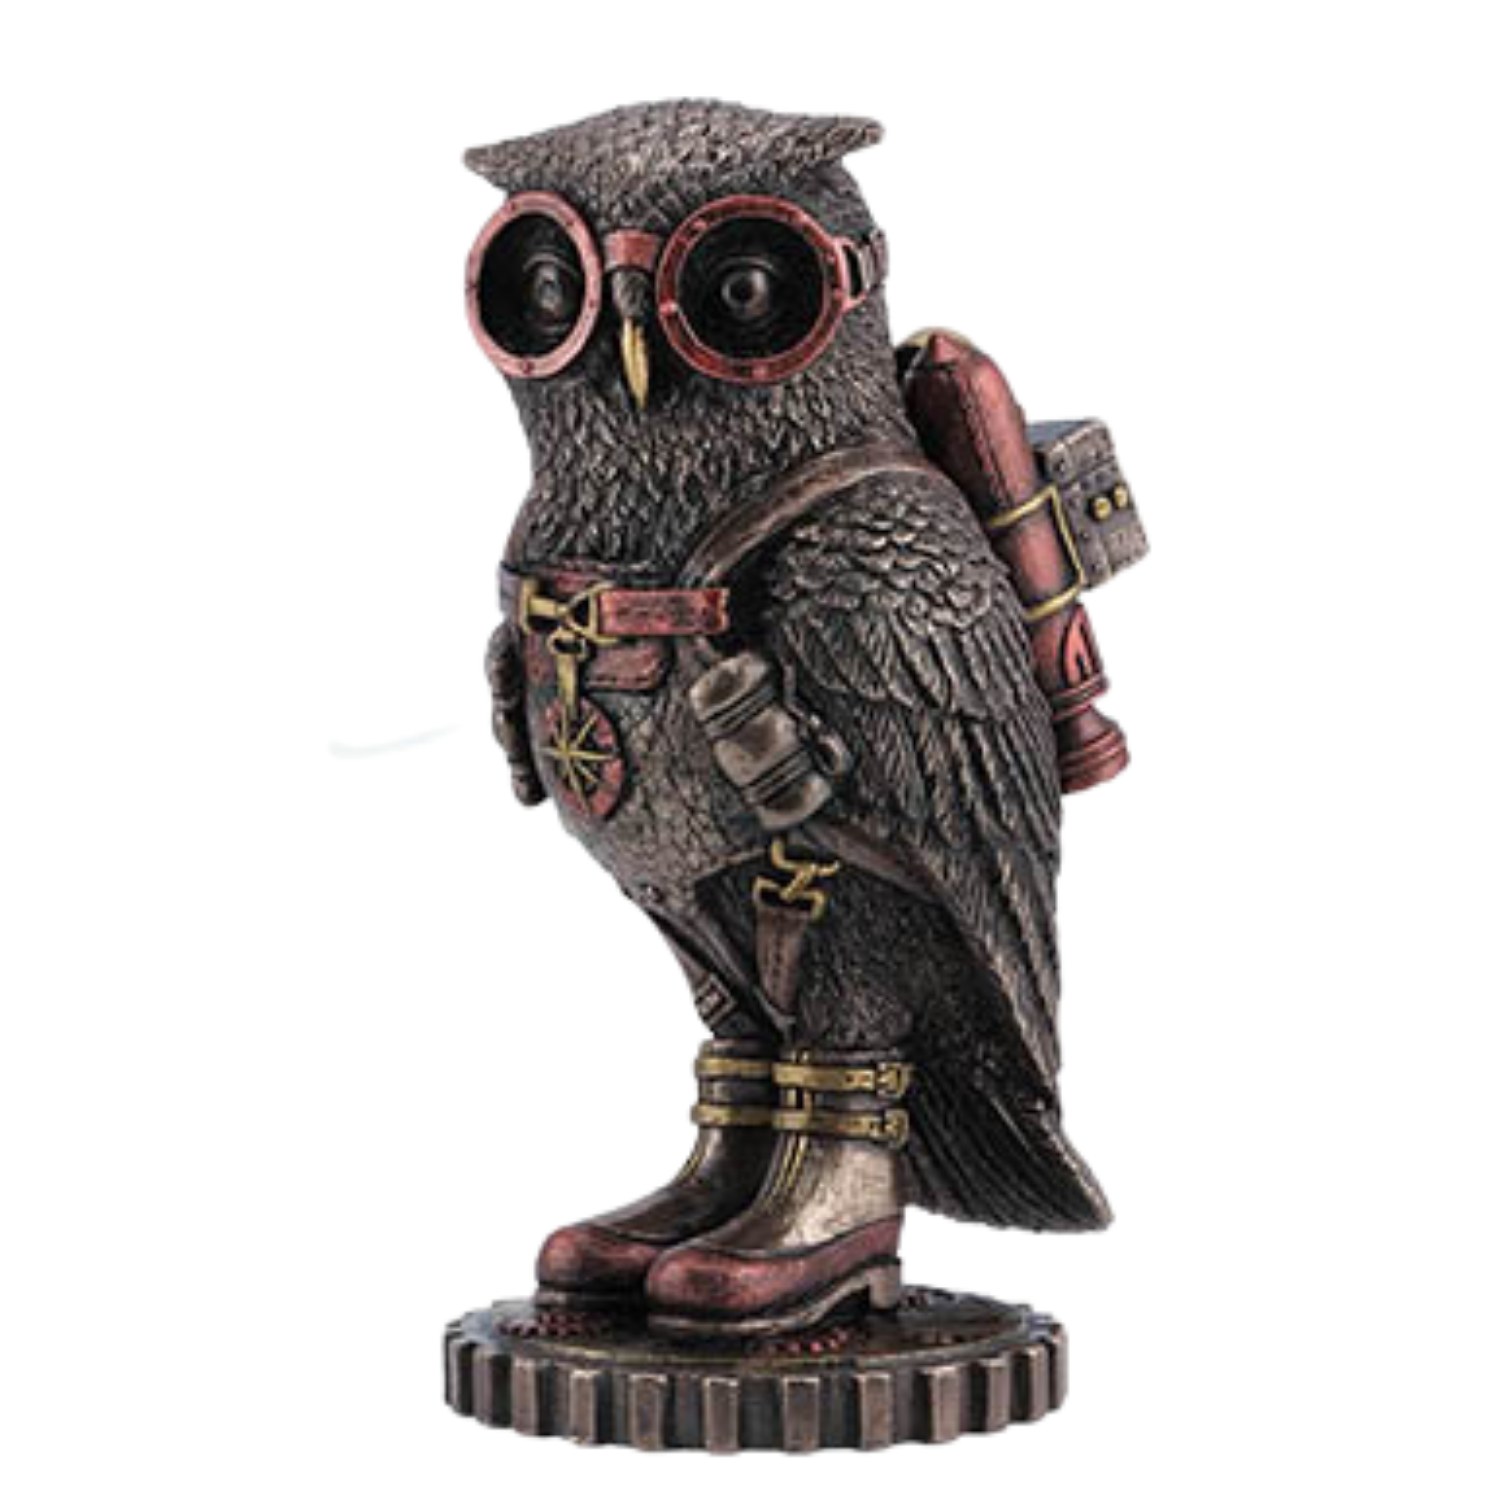 Steampunk Owl with Goggles & Jetpack Figurine